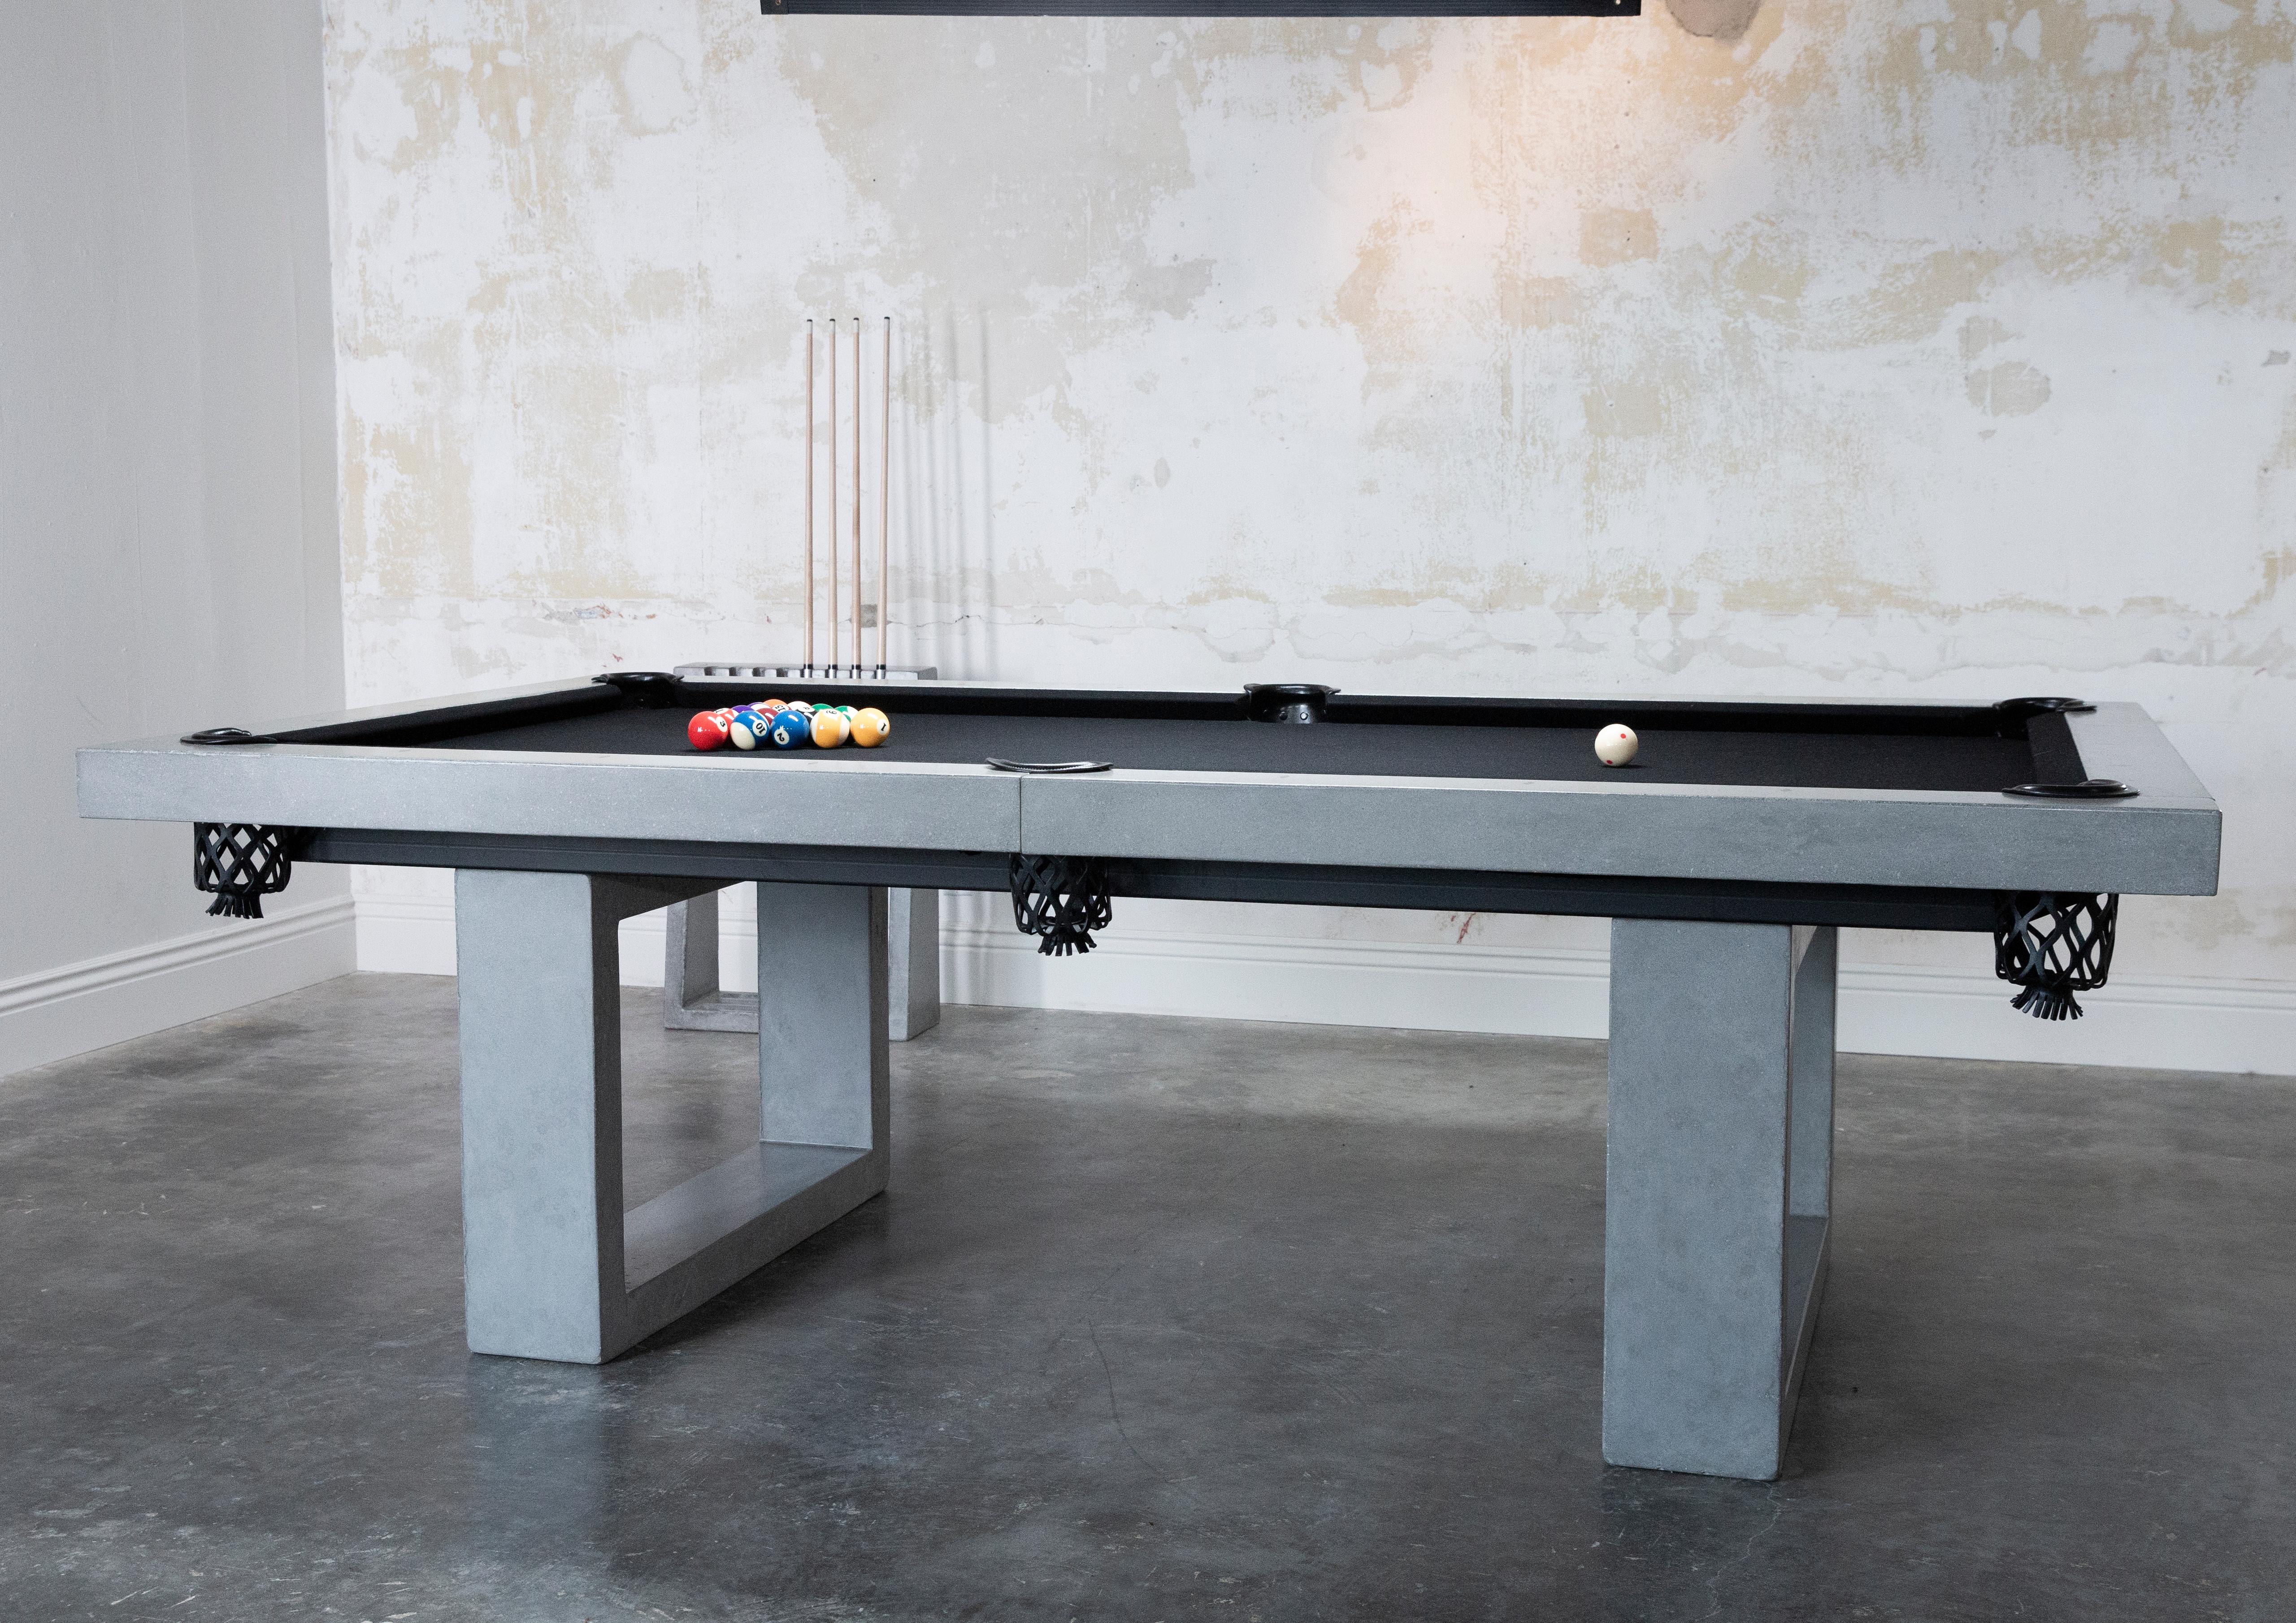 **7' Table and Cue Rack set available now in Dark Grey**

The classic James de Wulf Concrete Billiards Table is a staple to any game room. The regulation sized table is constructed of concrete reinforced with carbon fiber. It features a smooth,